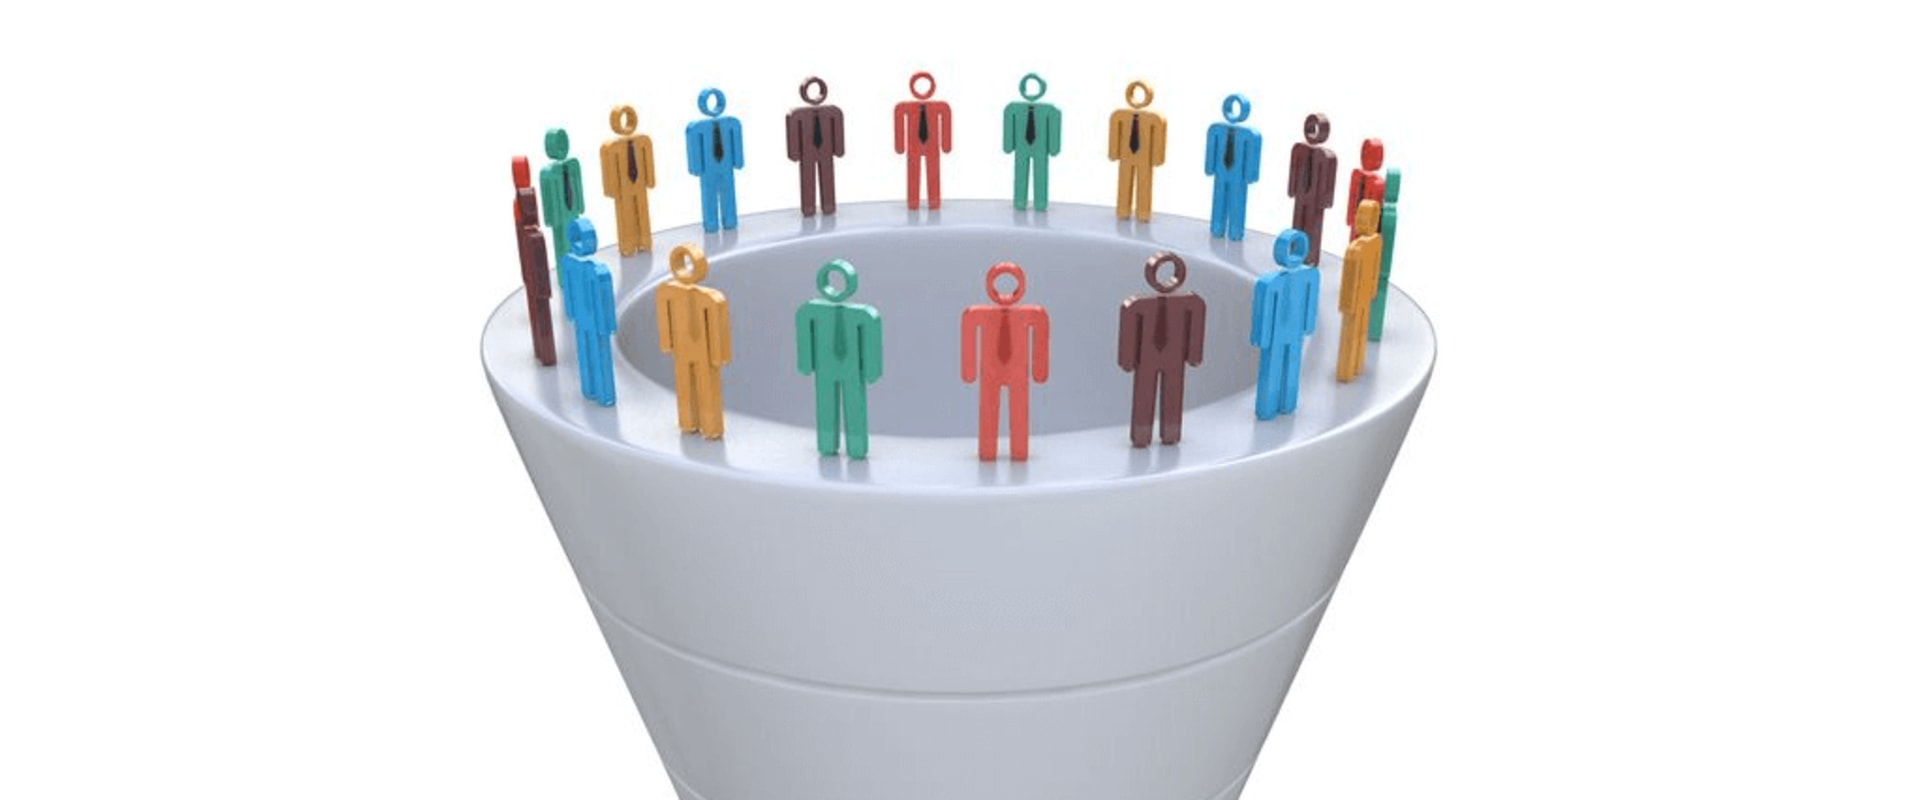 Do You Need a Sales Funnel to Grow Your Business?